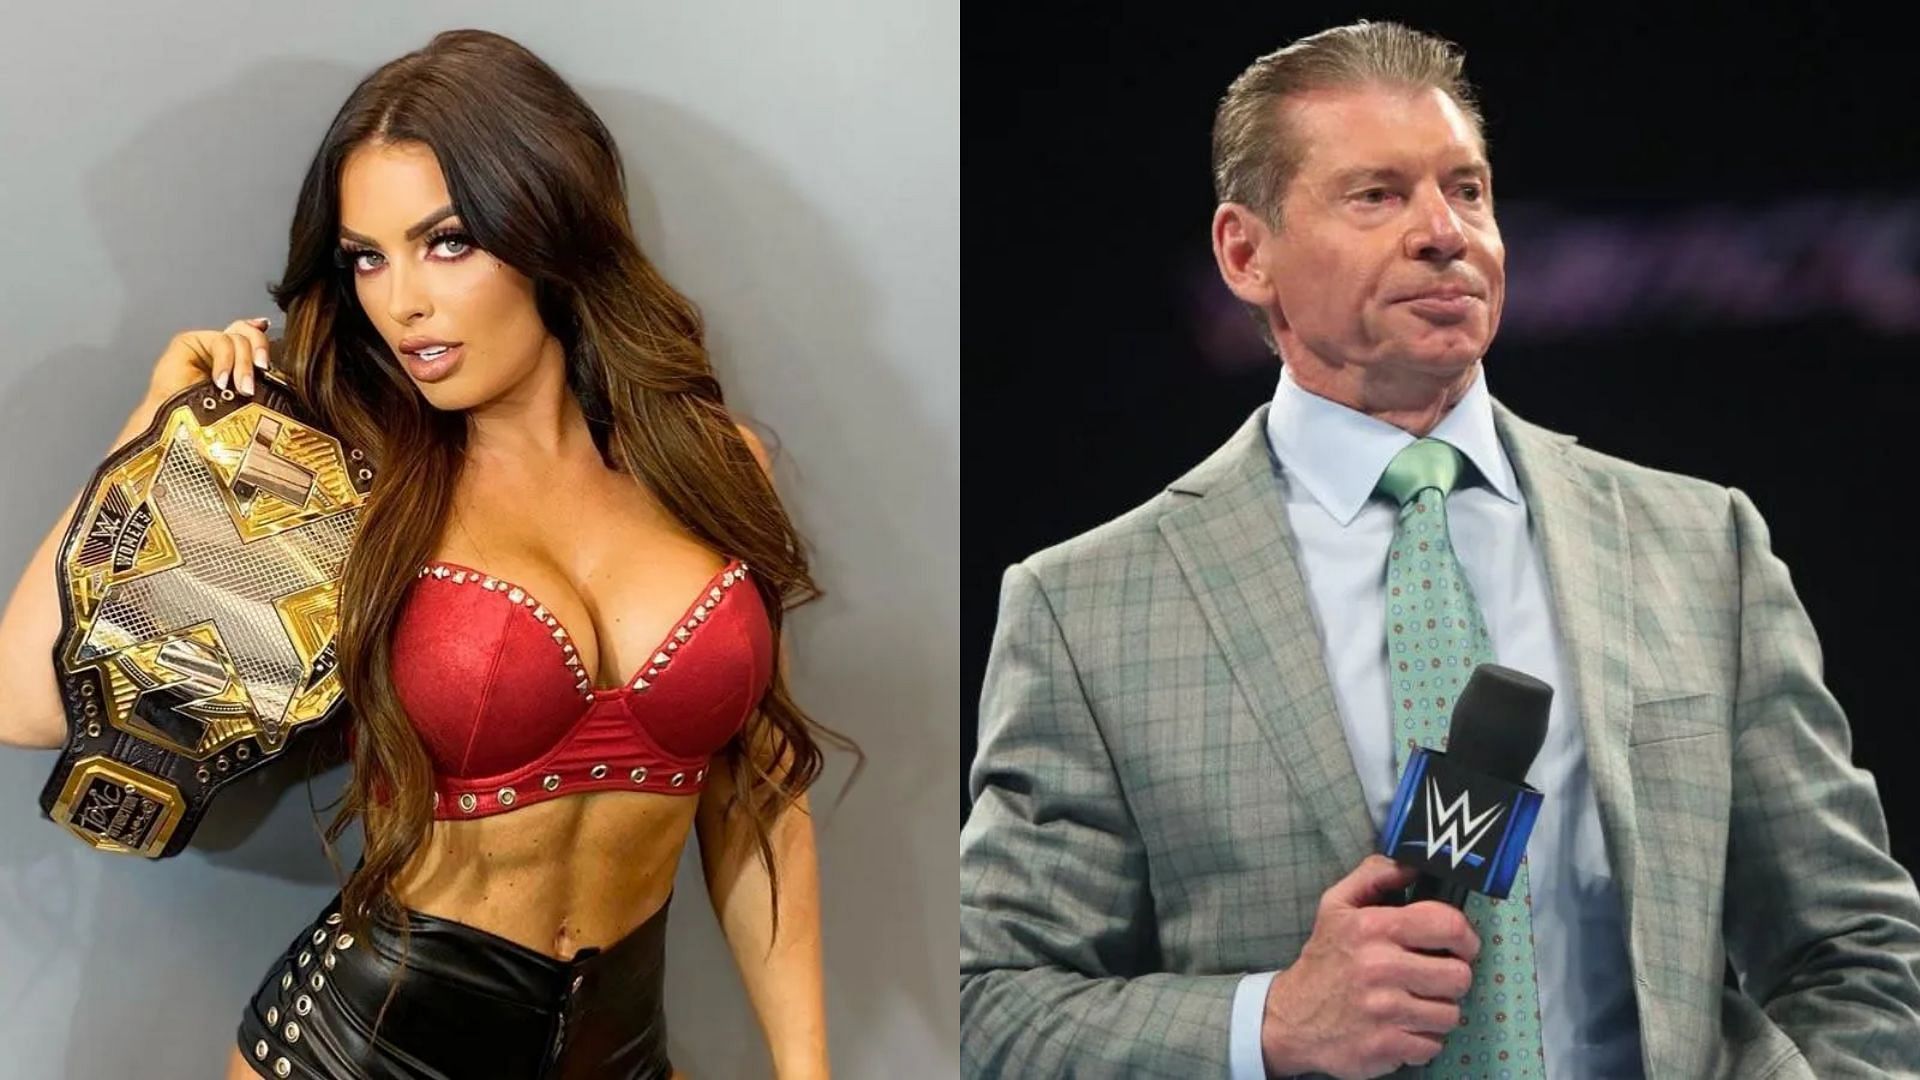 Mandy Rose (left) and Vince McMahon (right)